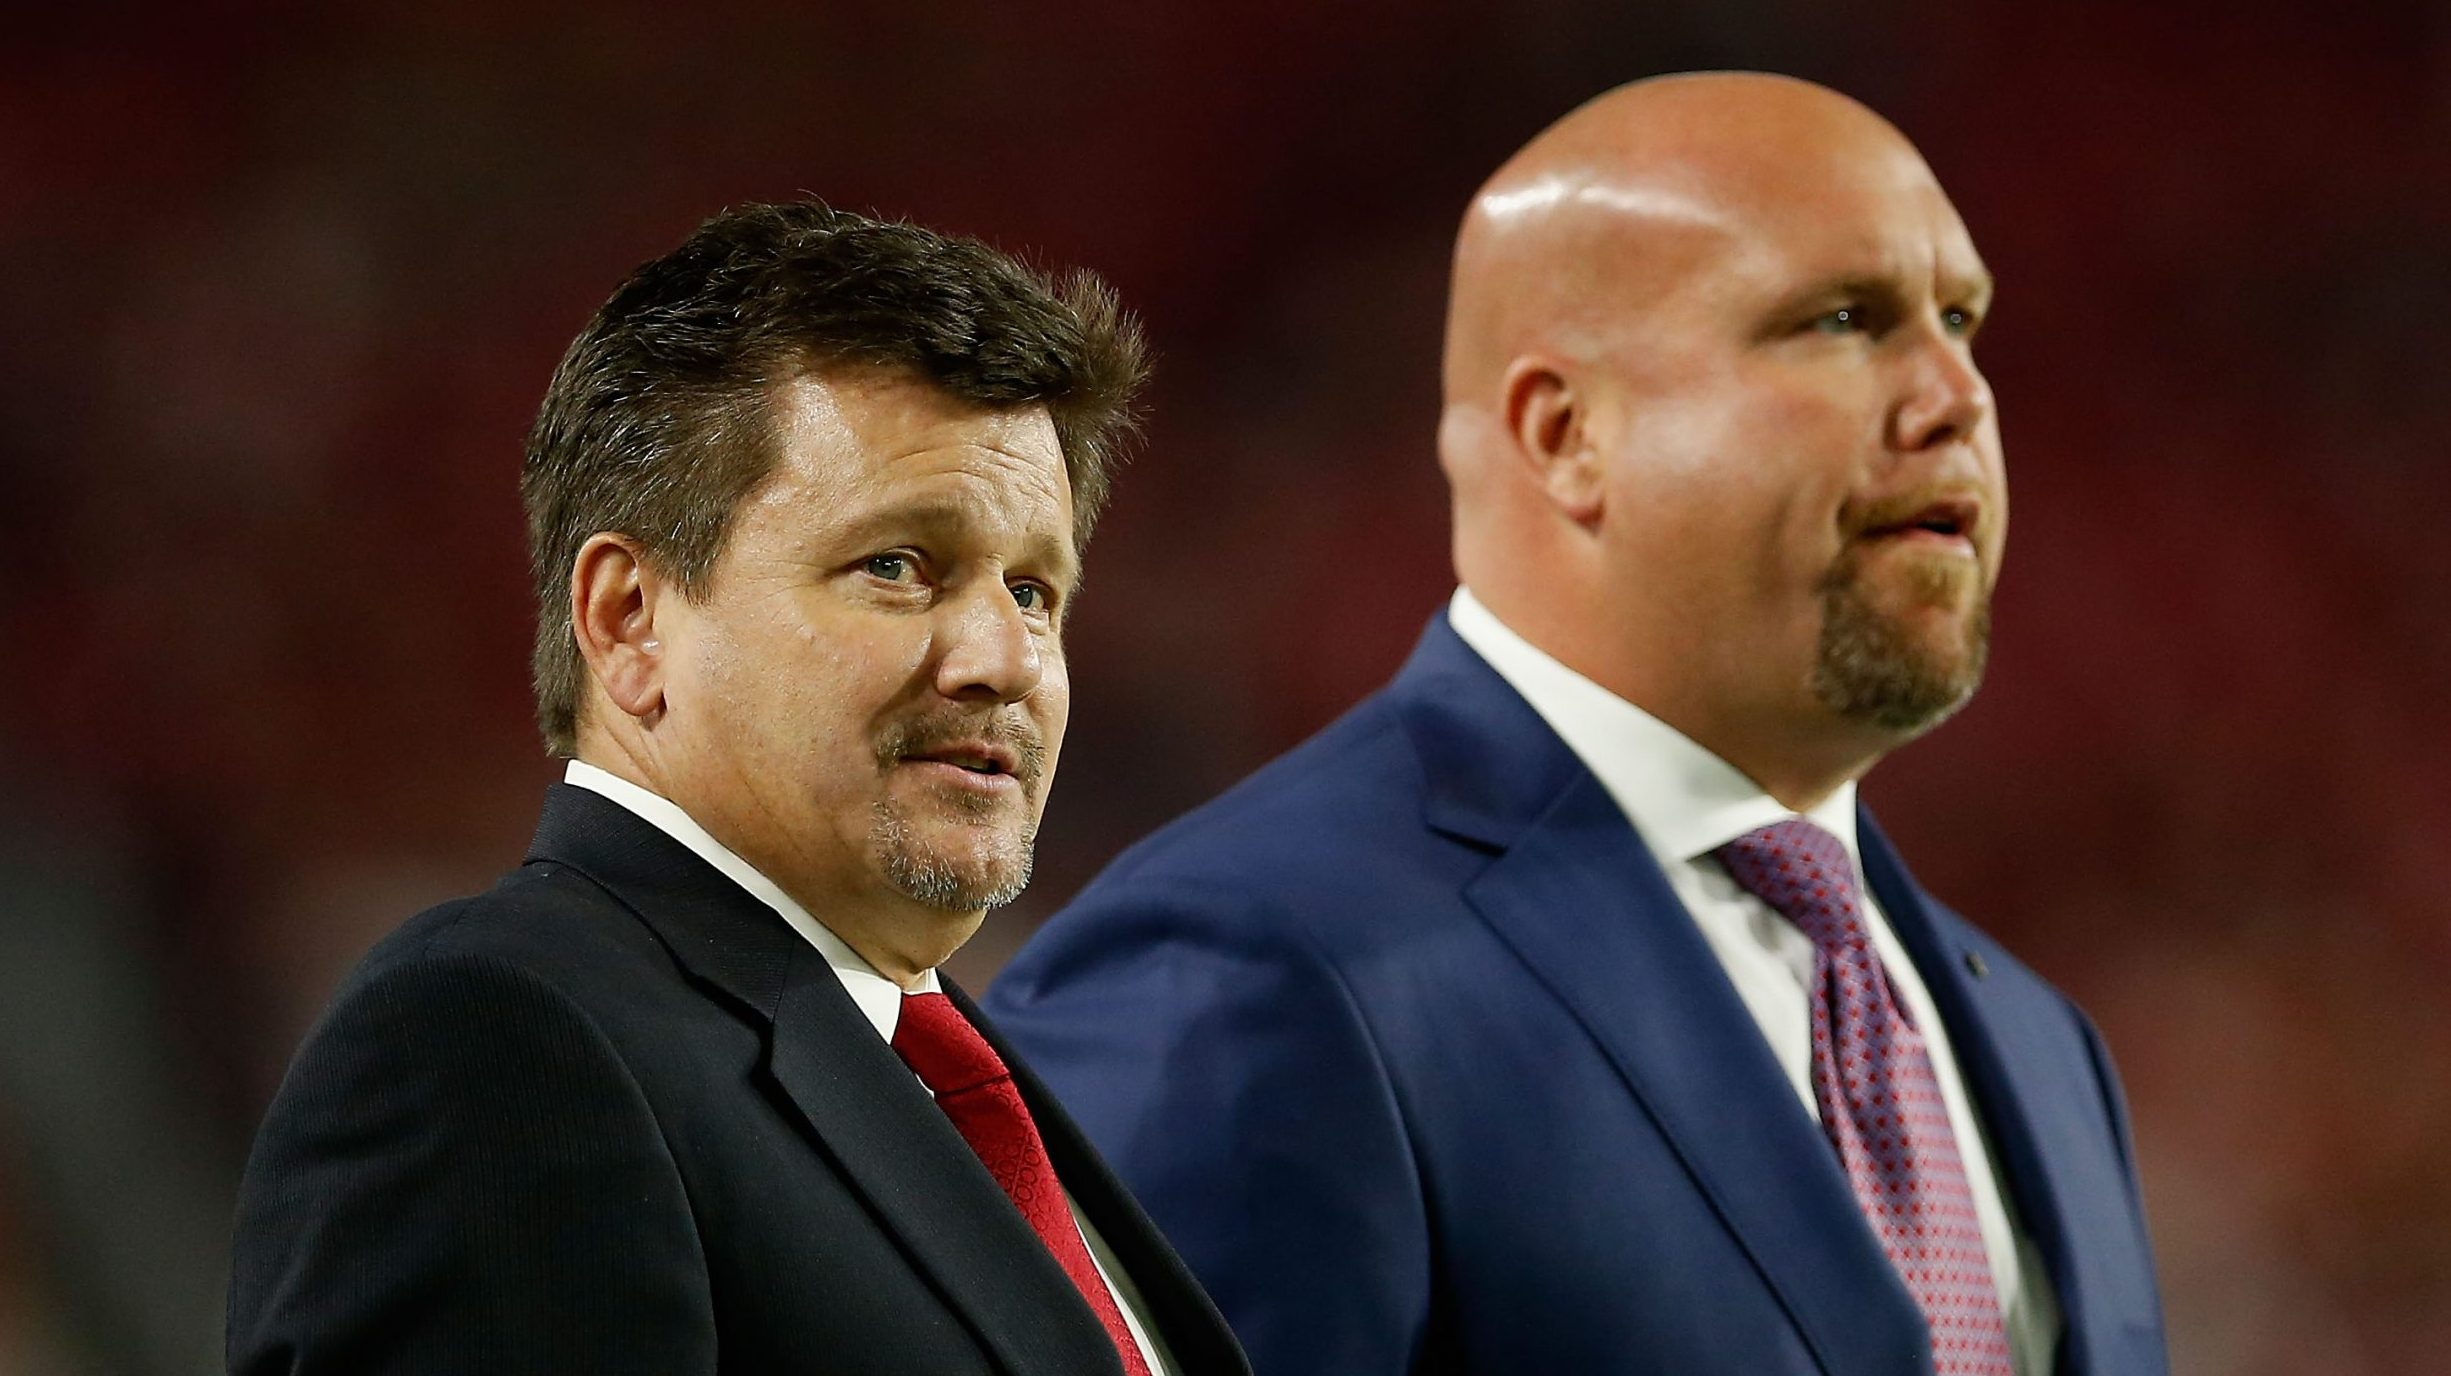 President Michael J. Bidwill of the Arizona Cardinals (left) and general manager Steve Keim (right)...